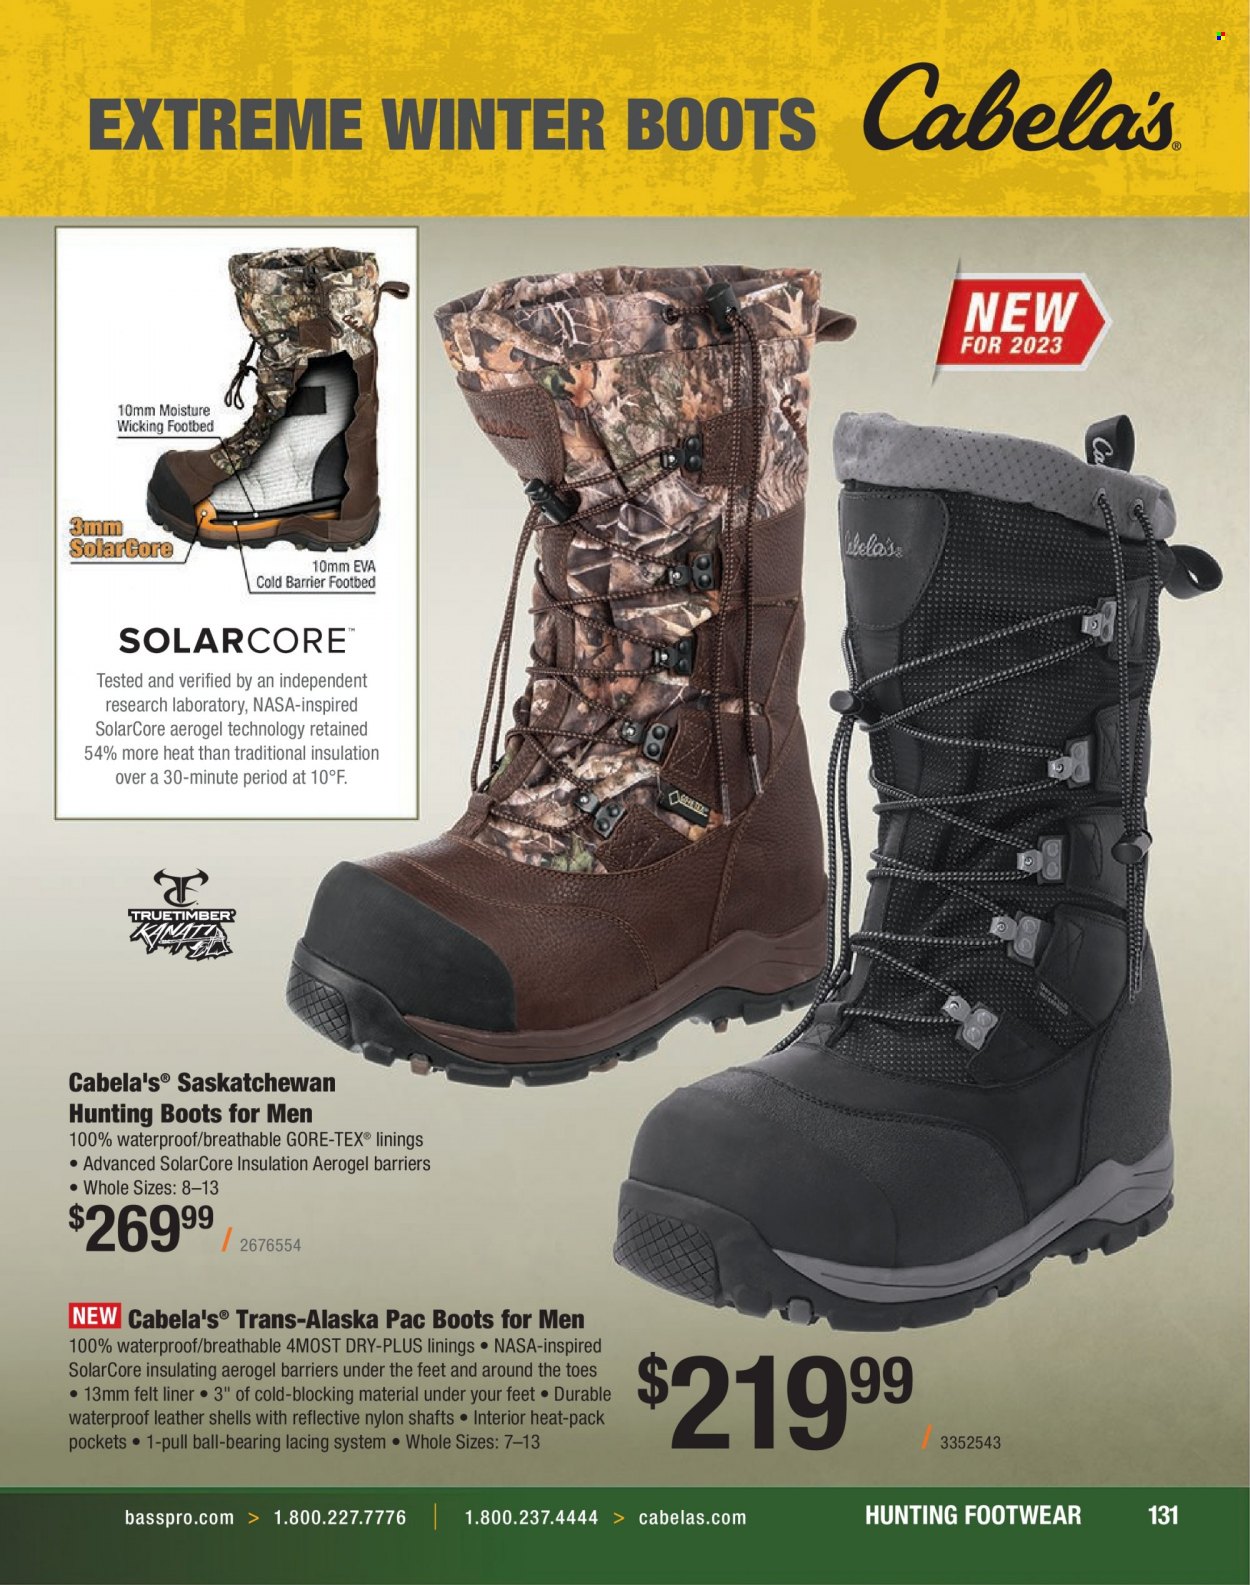 Bass Pro Shops flyer . Page 131.